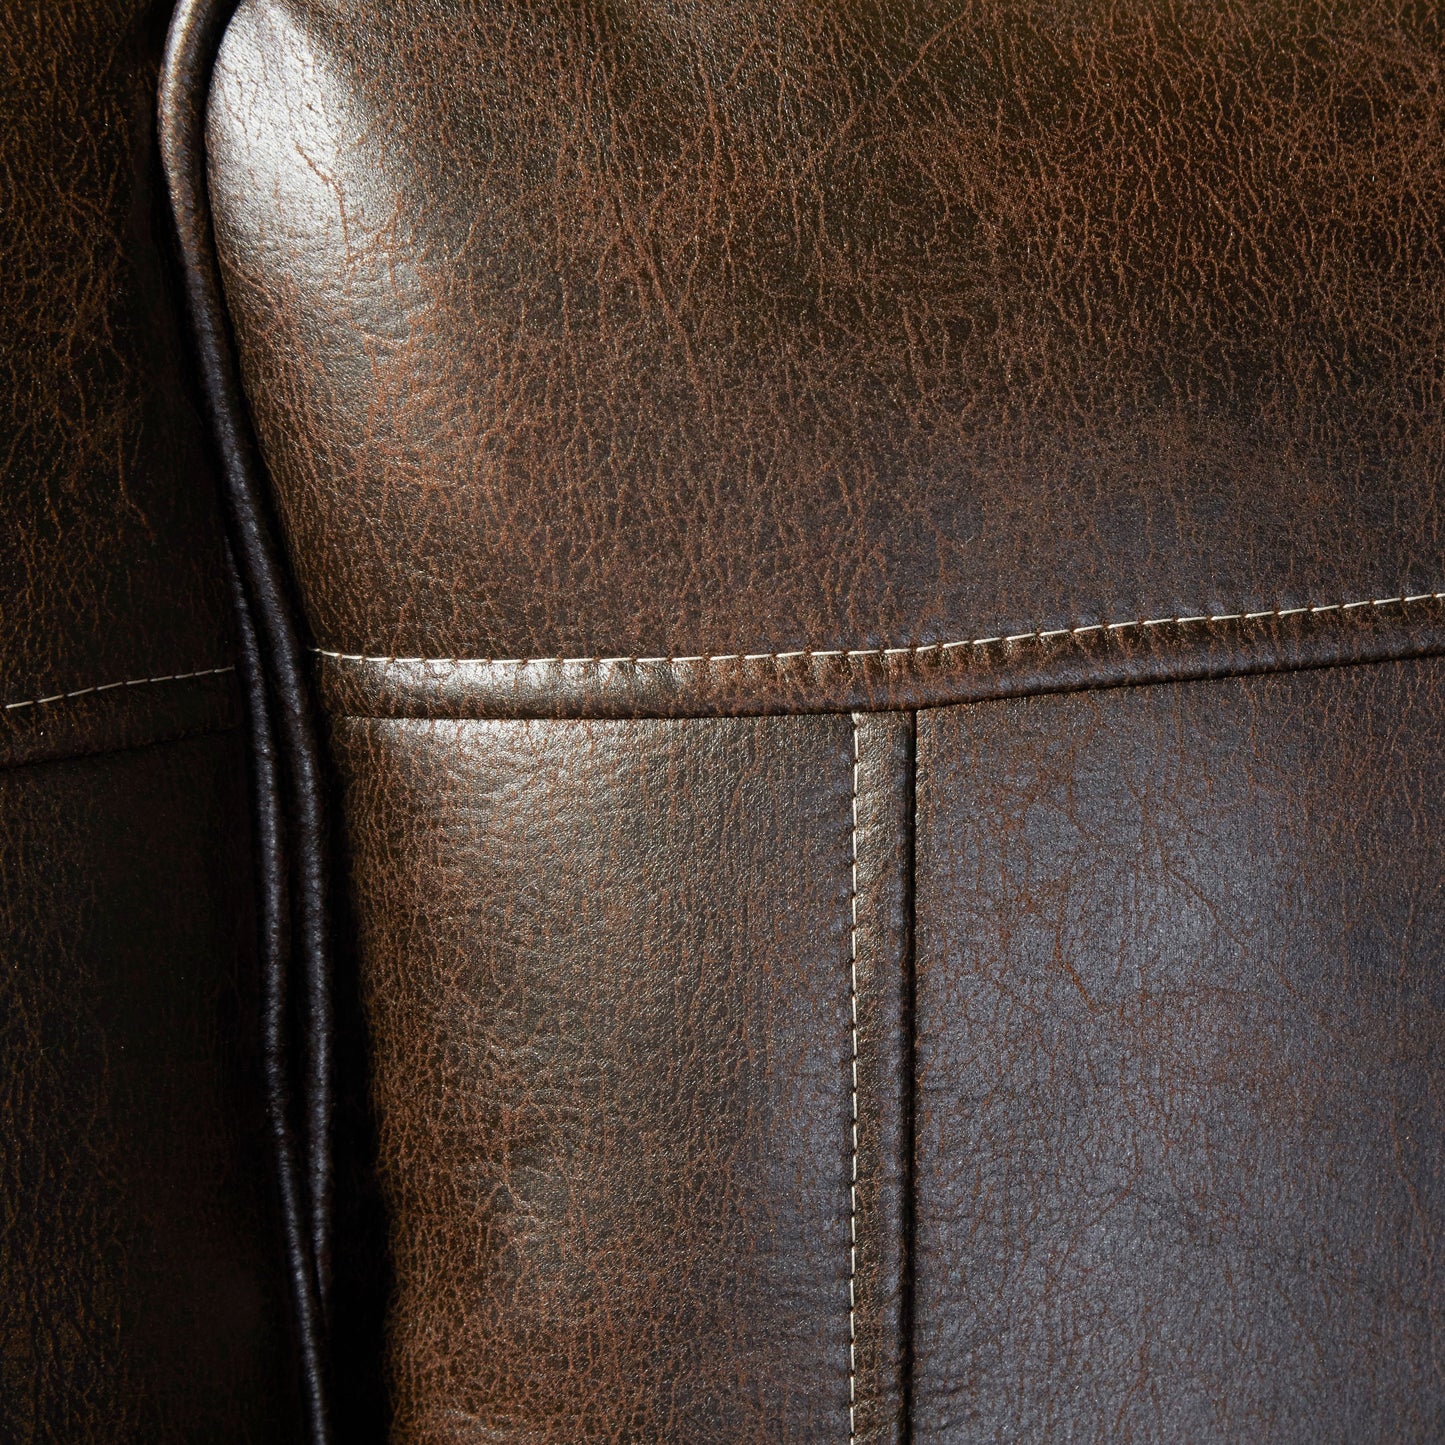 Leinster Faux Leather Upholstered Nailhead Chair in Espresso